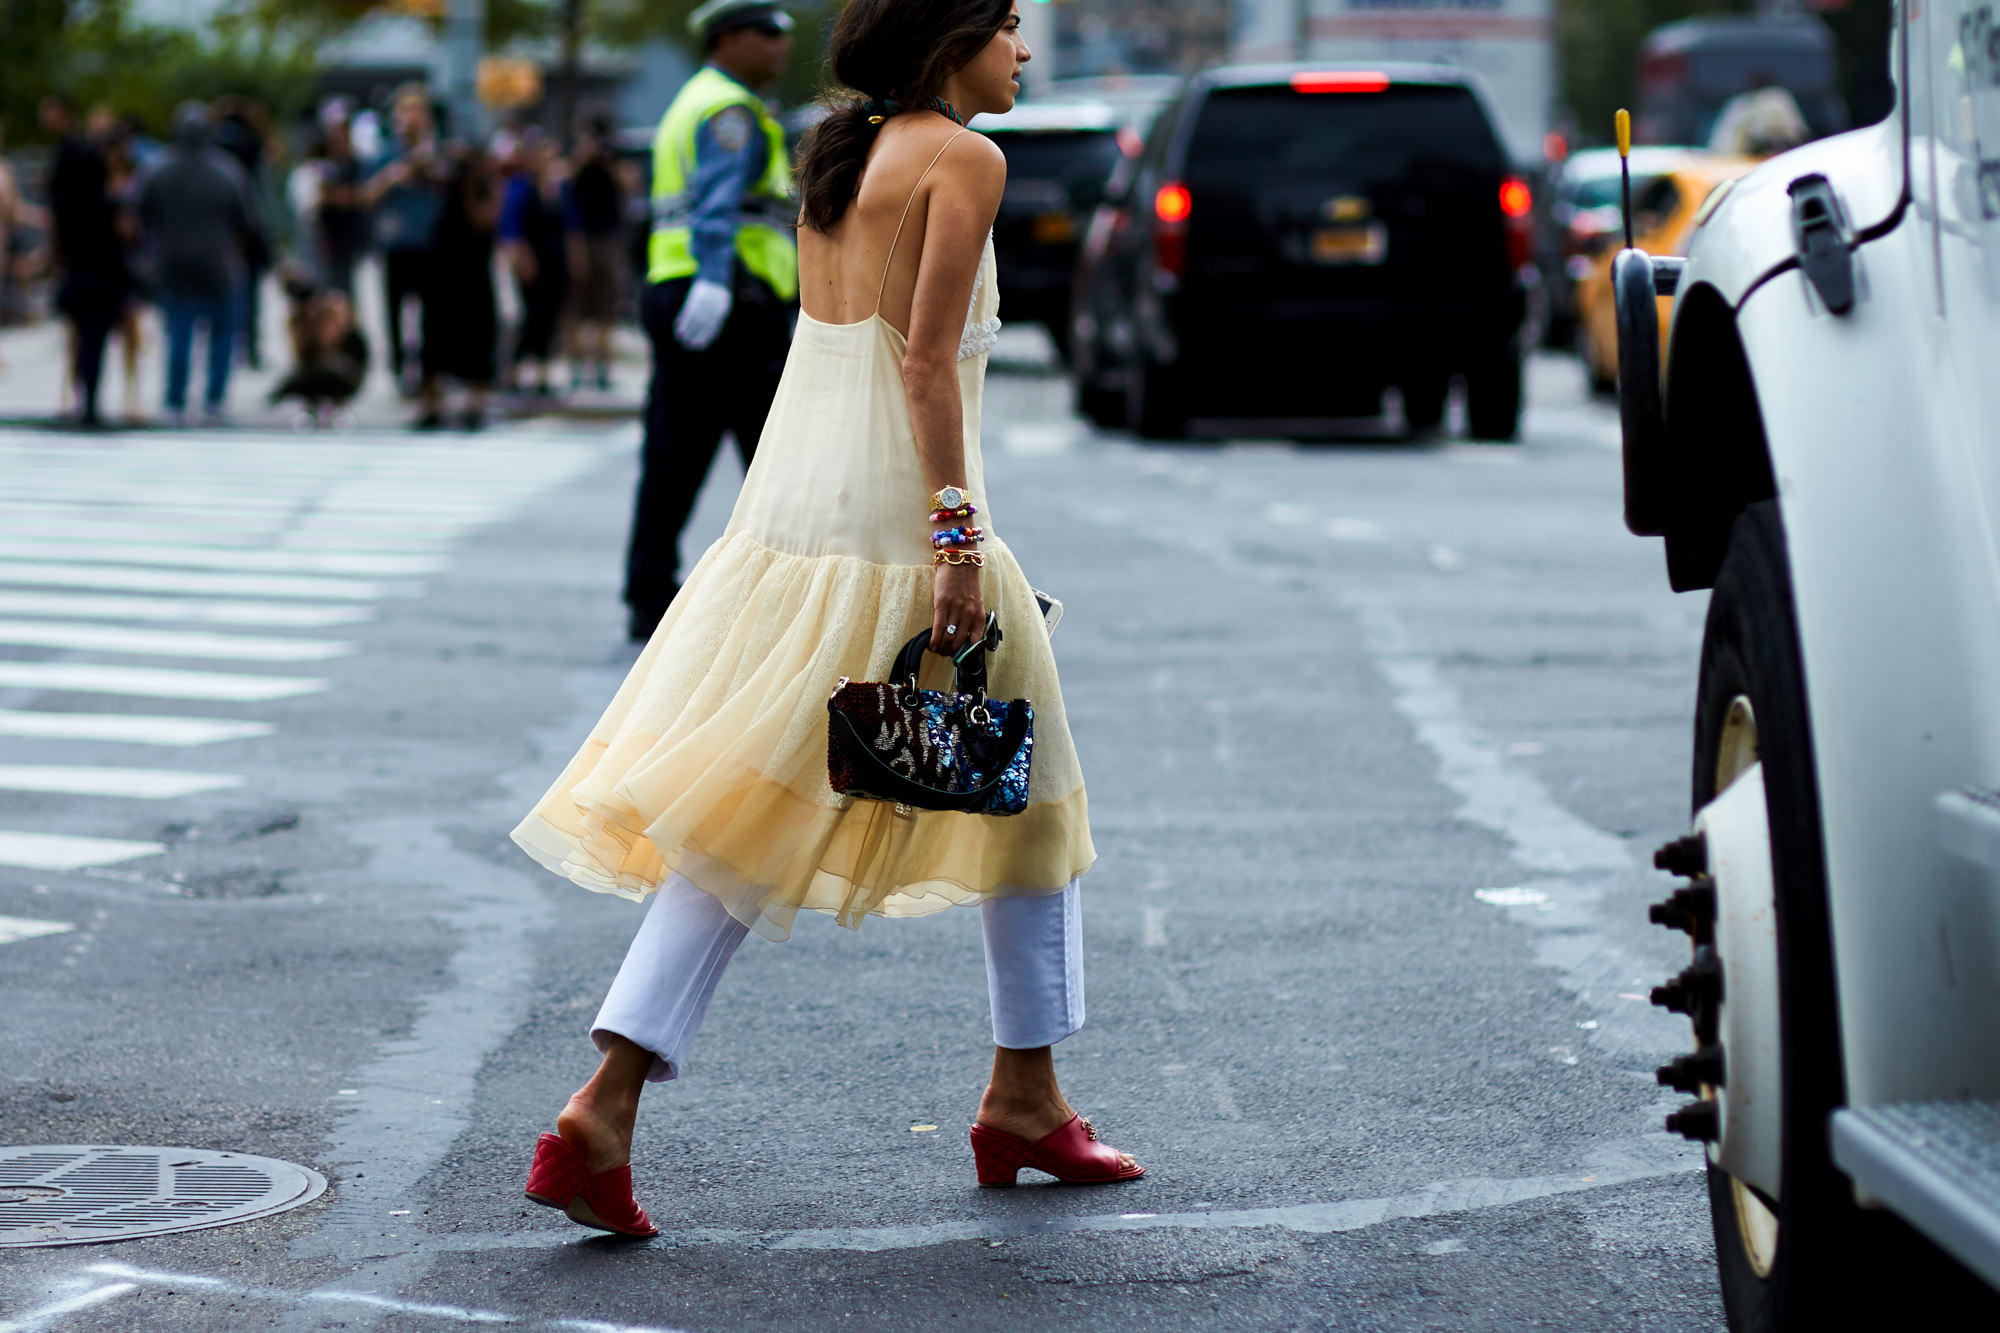 NYFW Spring-Summer 2017 Streetstyle: Leandra Medine of The Man Repeller wearing a dress over pants and red mules after a show in New York, September 2016